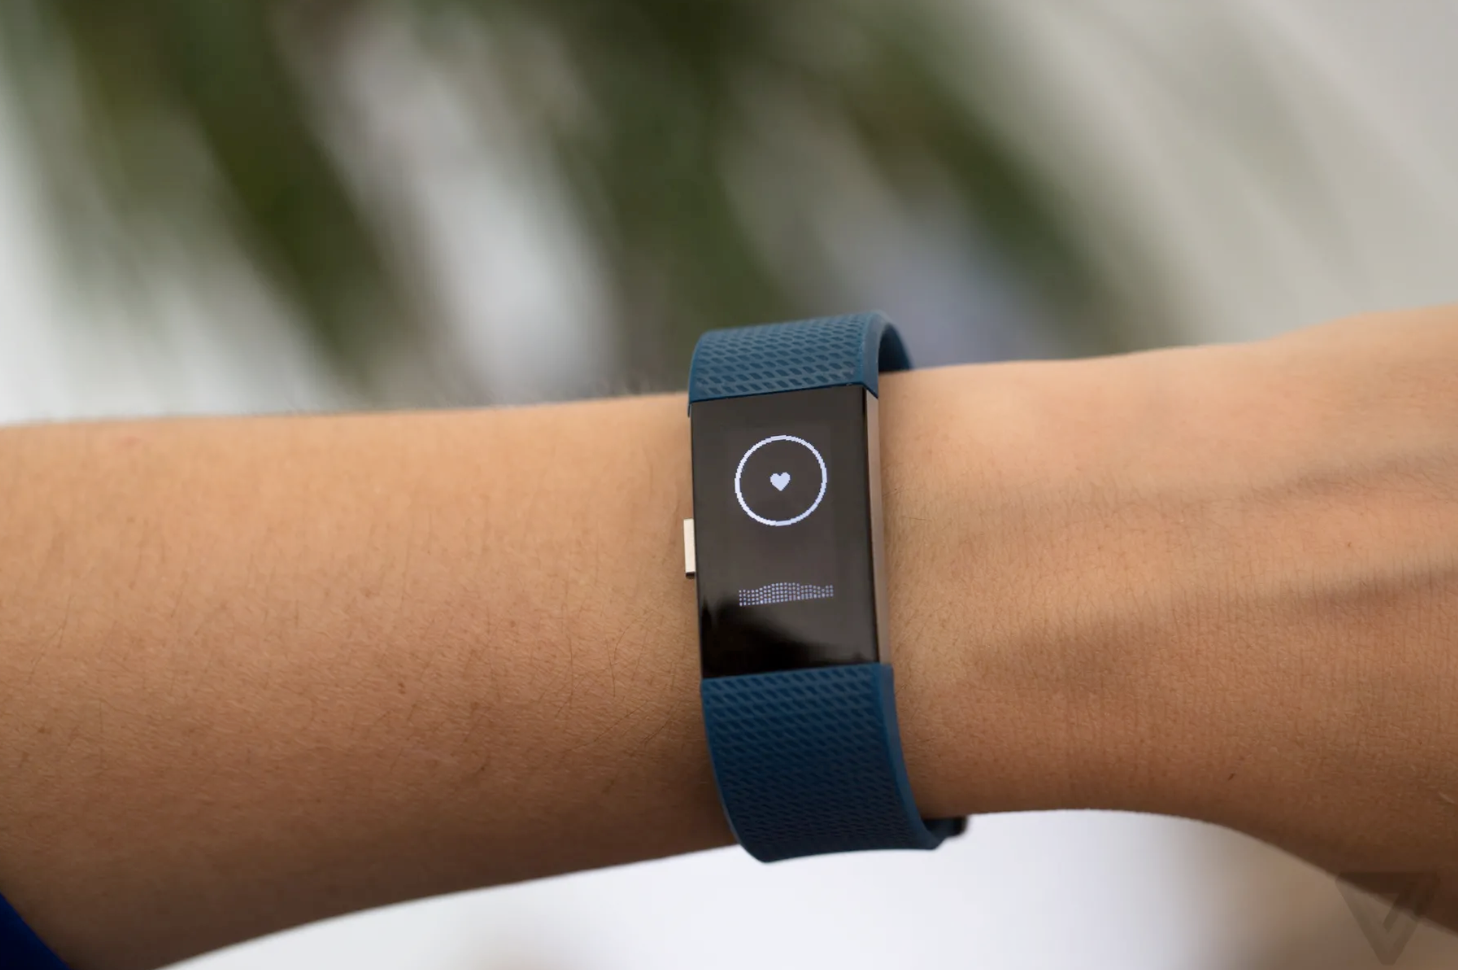 Activity data from wearables could help monitor blood sugar levels, study indicates